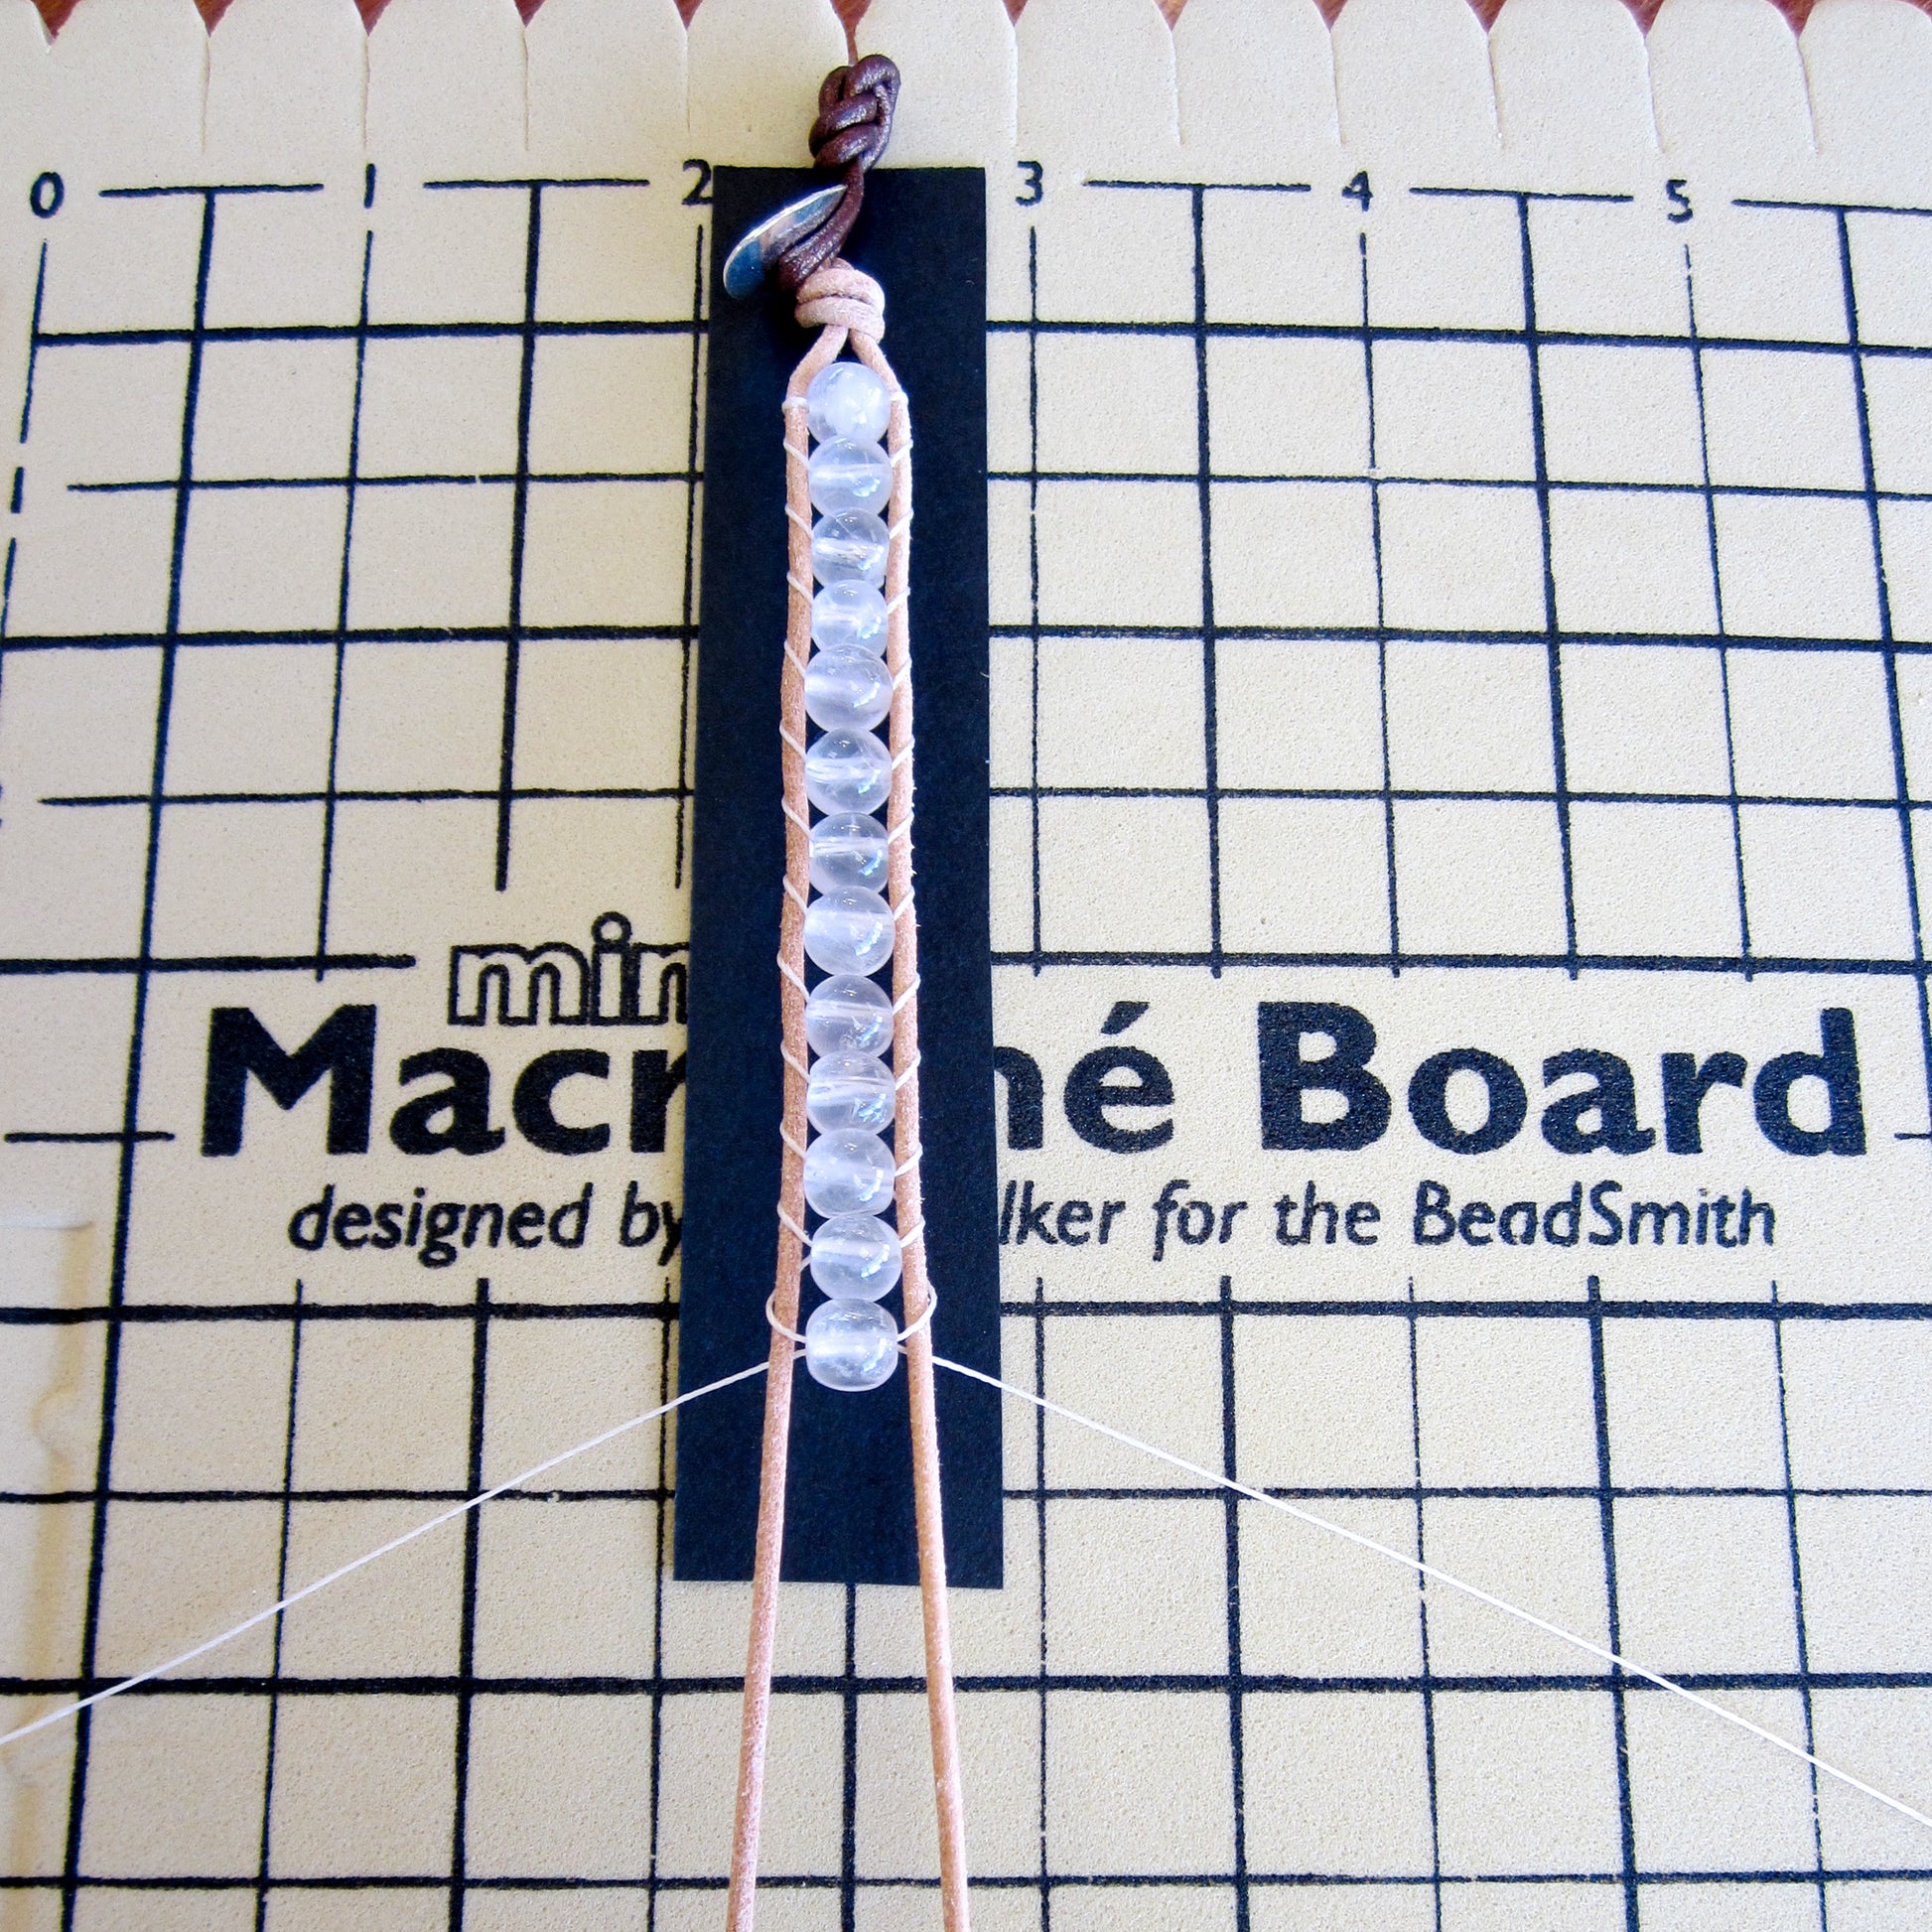 The Beadsmith Macrame Board 8x8/12x16/ 16x16 inches 0.5-inch-thick